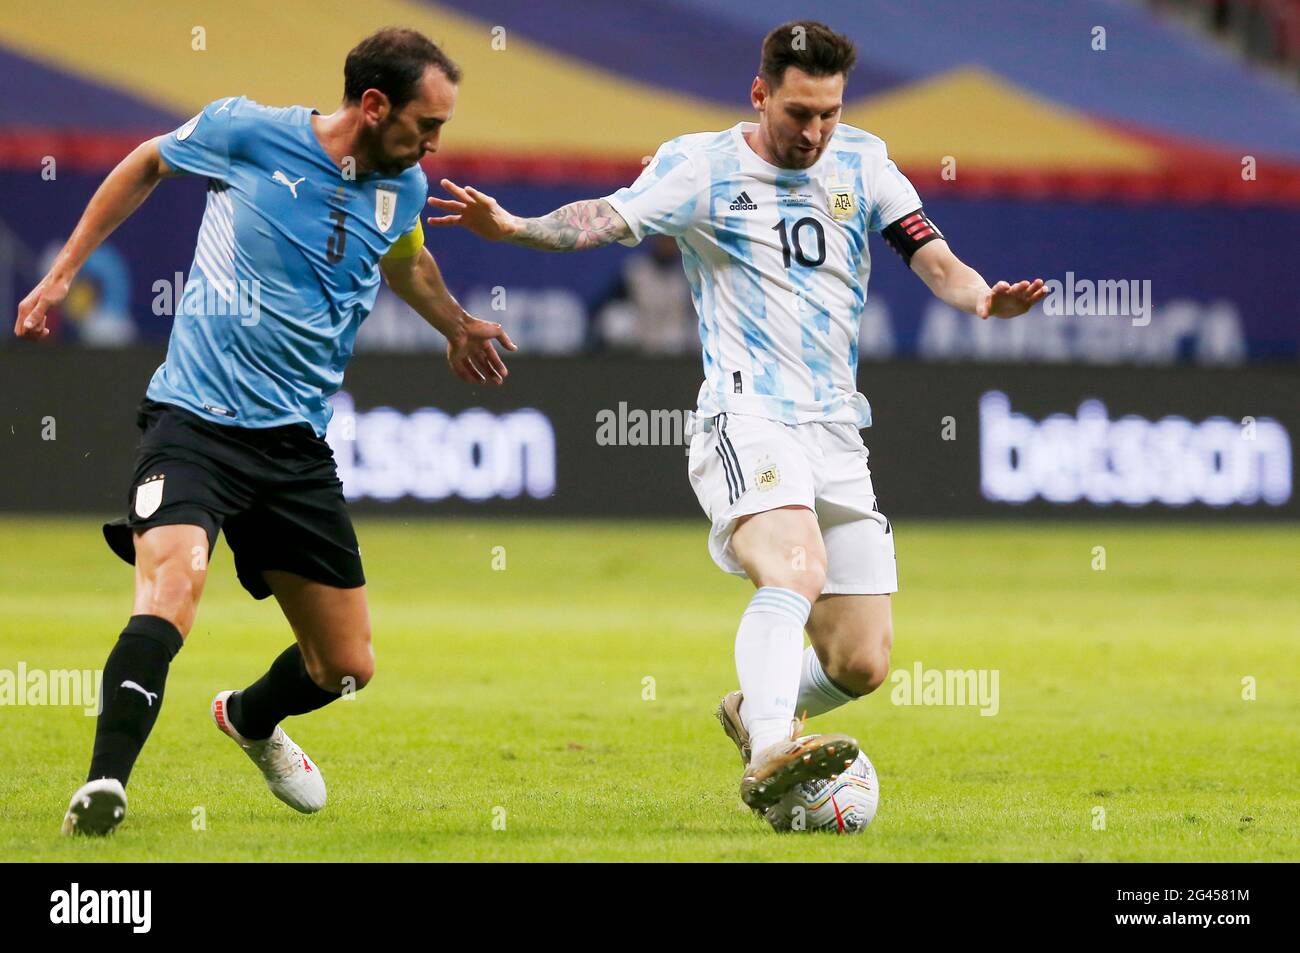 Brasilia, Brazil. 18th June, 2021. Argentina's Lionel Messi (R) vies with Uruguay's Diego Godin during the 2021 Copa America group A football match between Argentina and Uruguay in Brasilia, Brazil, June 18, 2021. Credit: Lucio Tavora/Xinhua/Alamy Live News Stock Photo